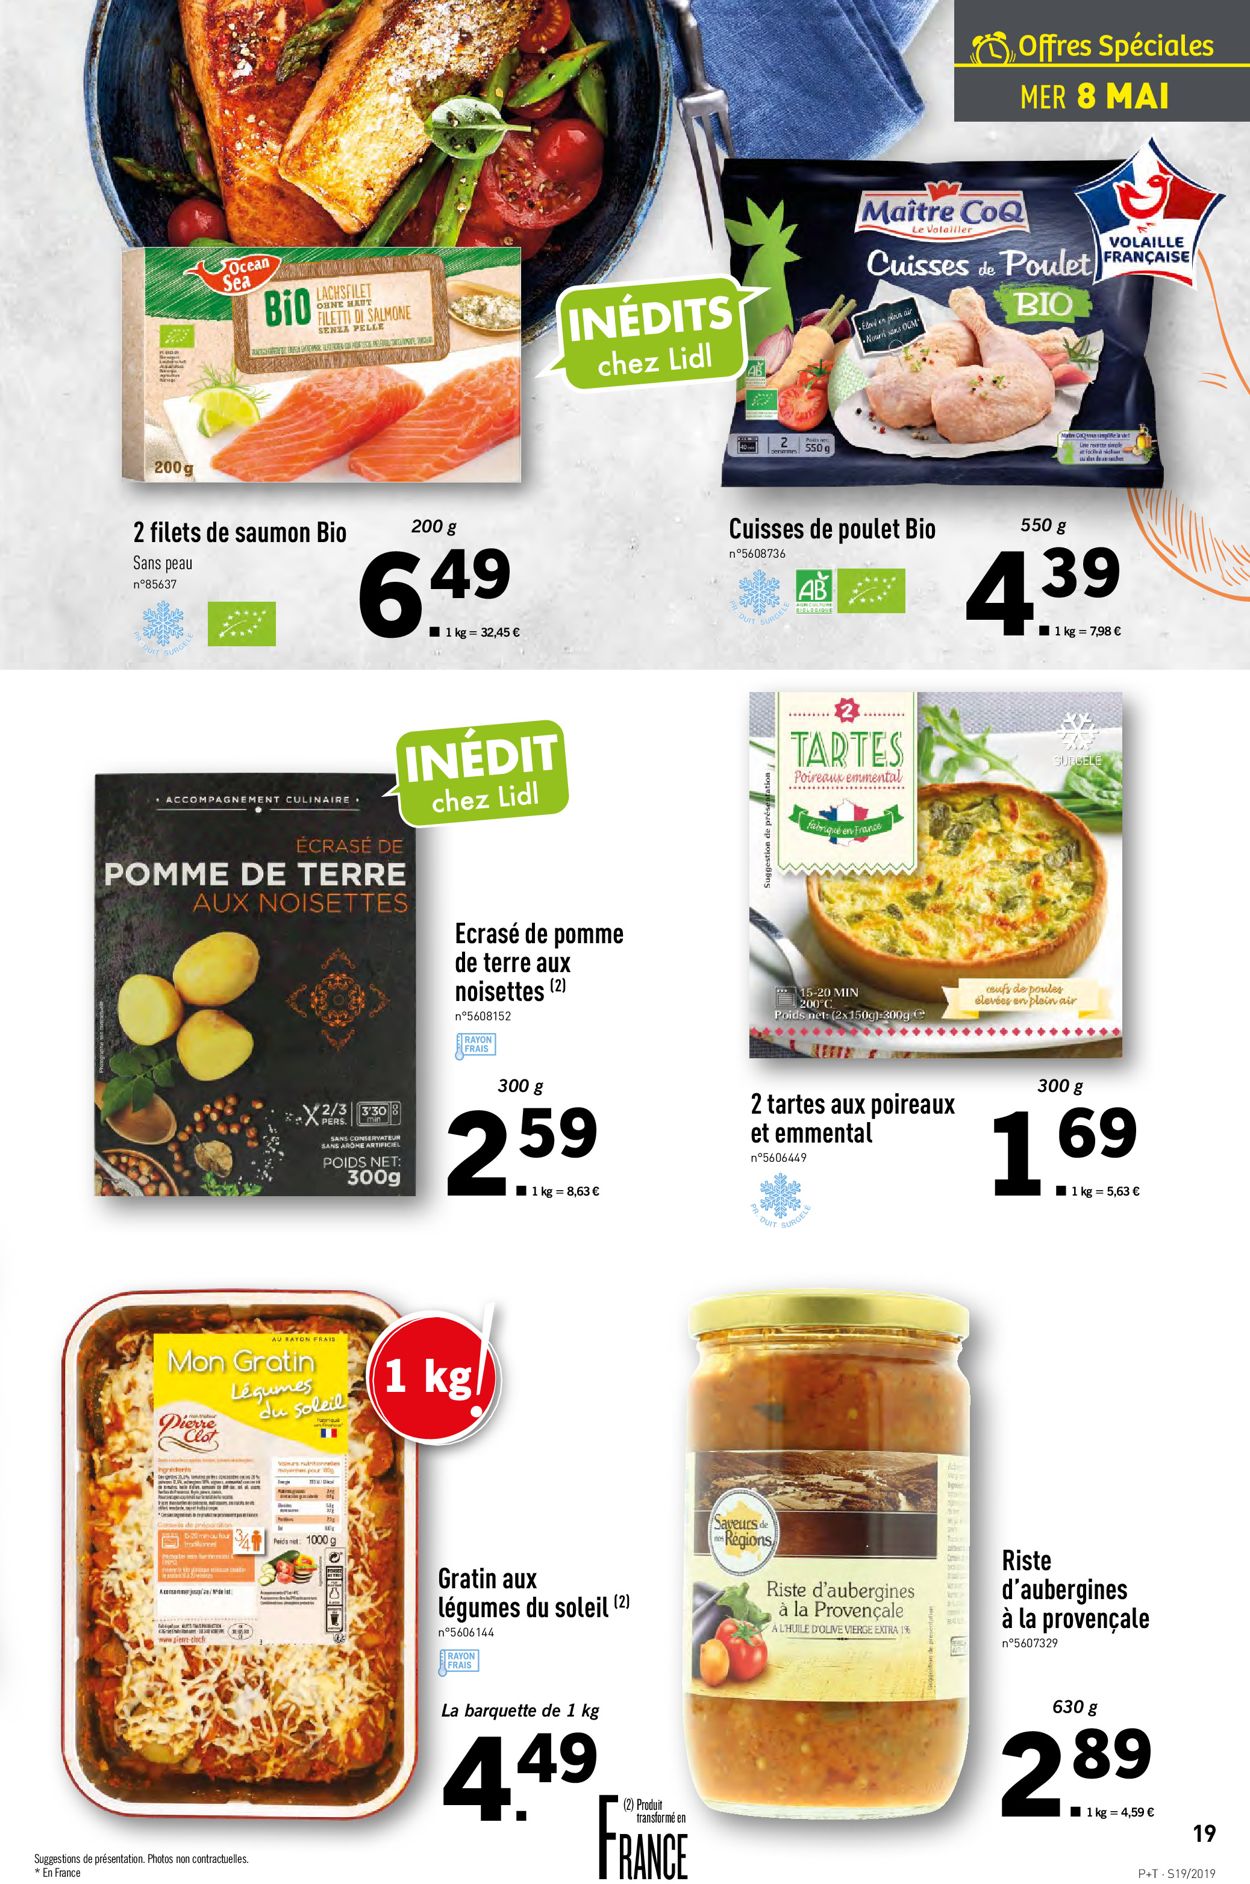 Lidl Catalogue - 08.05-14.05.2019 (Page 19)